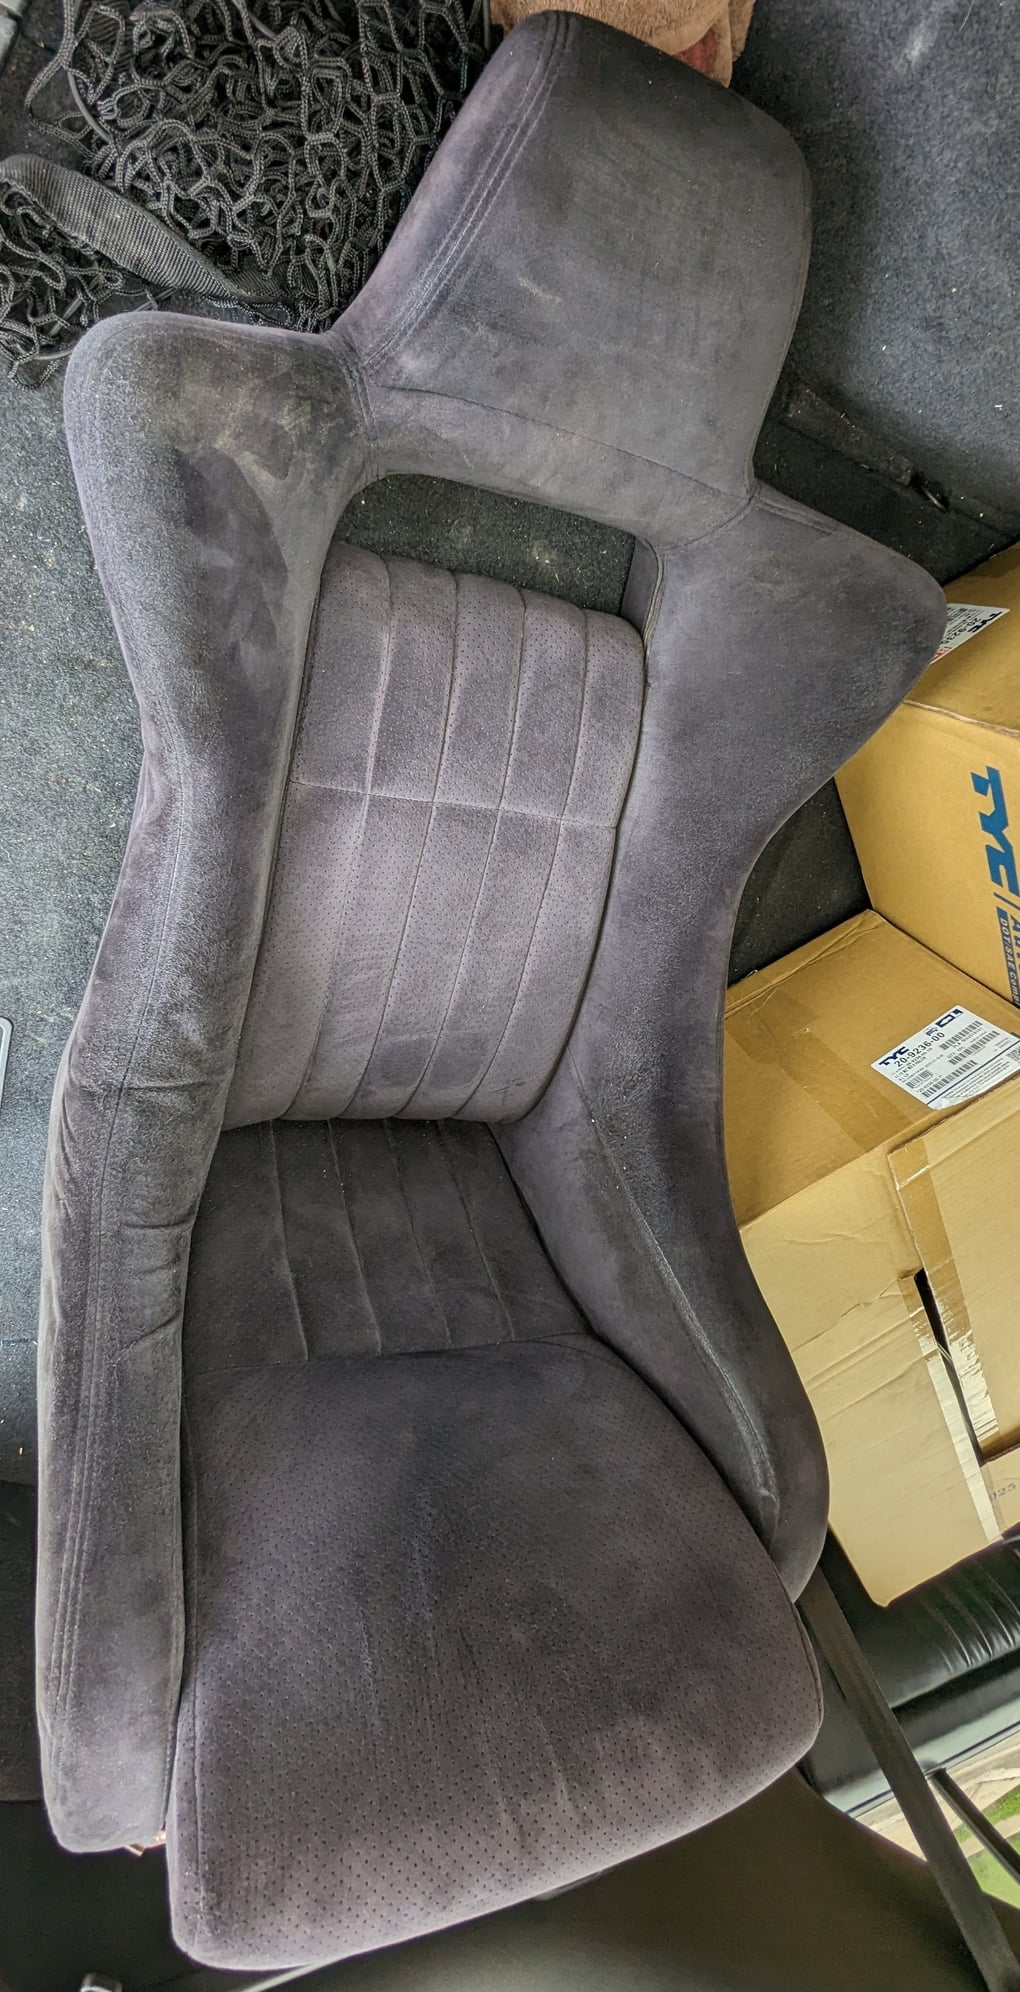 Interior/Upholstery - FS: JDM Infini Seat FC3S - Used - 1986 to 1991 Mazda RX-7 - Austin, TX 78702, United States